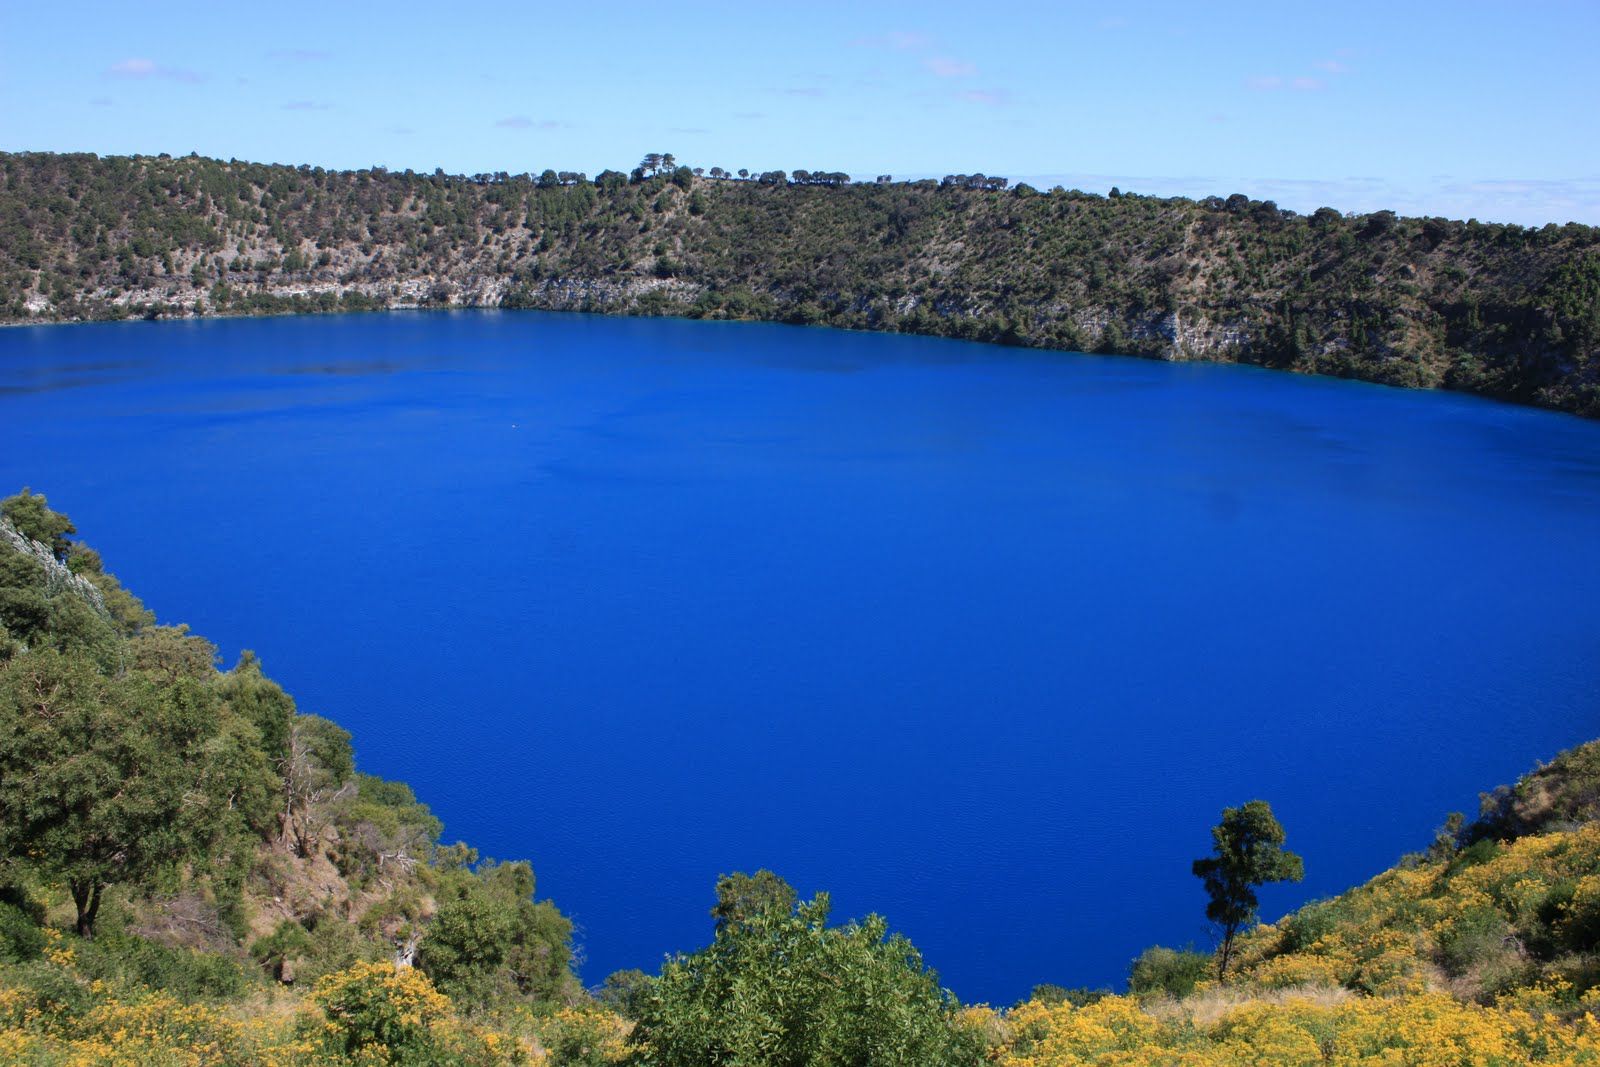 mount gambier the city located on the slopes of an extinct volcan ...